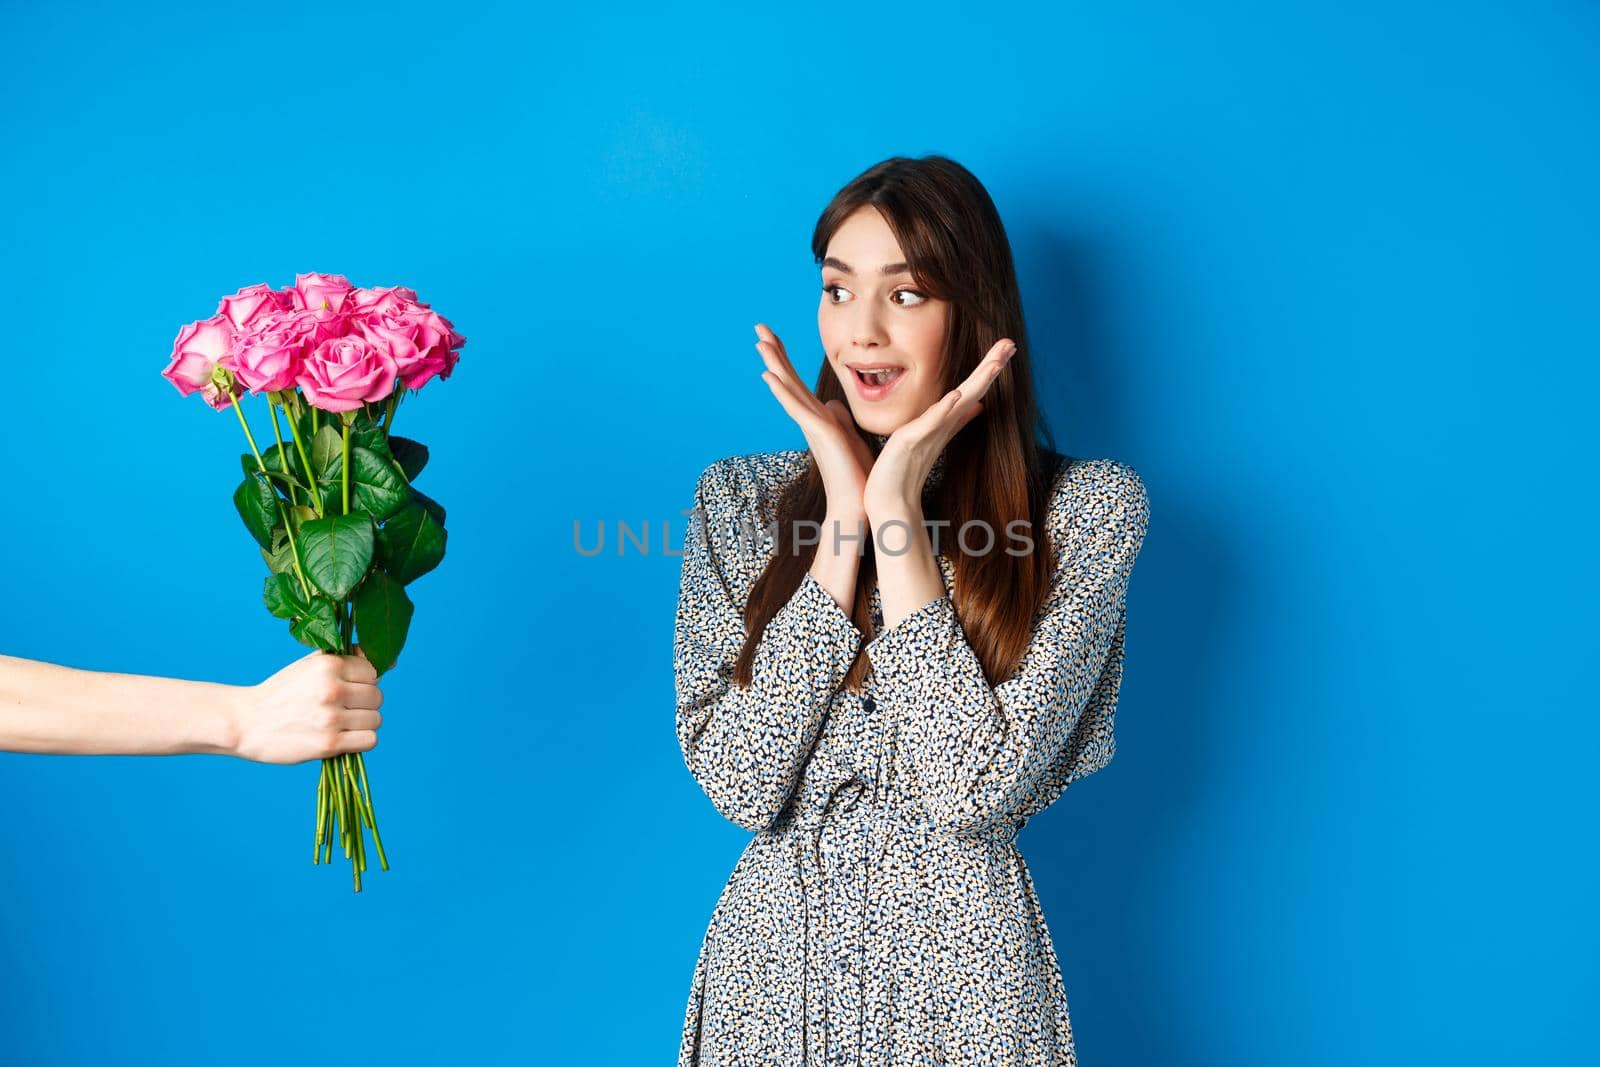 Valentines day concept. Romantic girl looking surprised at hand with flowers, woman receiving bouquet of pink roses, standing on blue background.